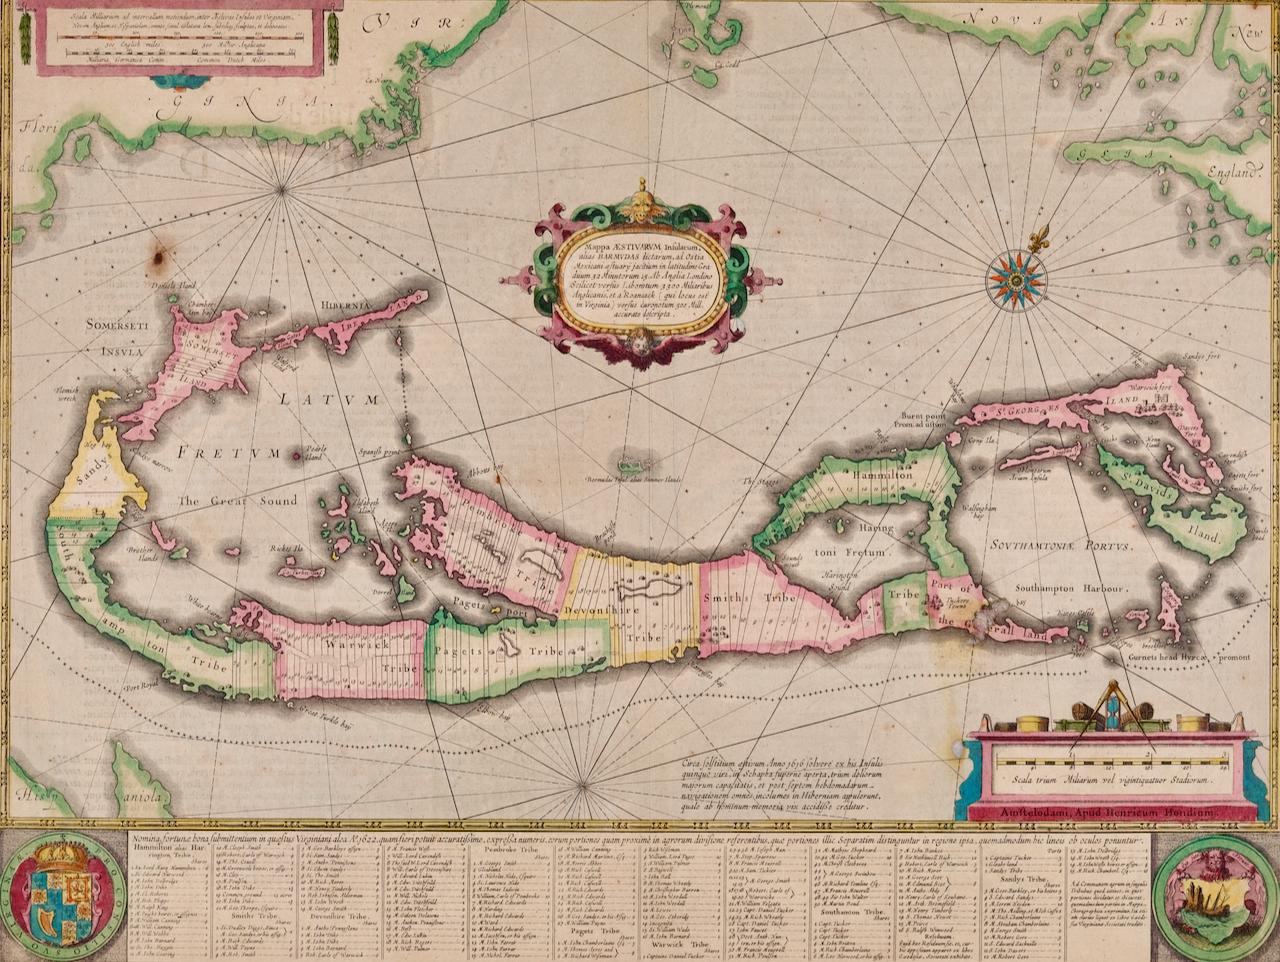 This attractive and interesting map of Bermuda by Henricus Hondius in 1633 is entitled 